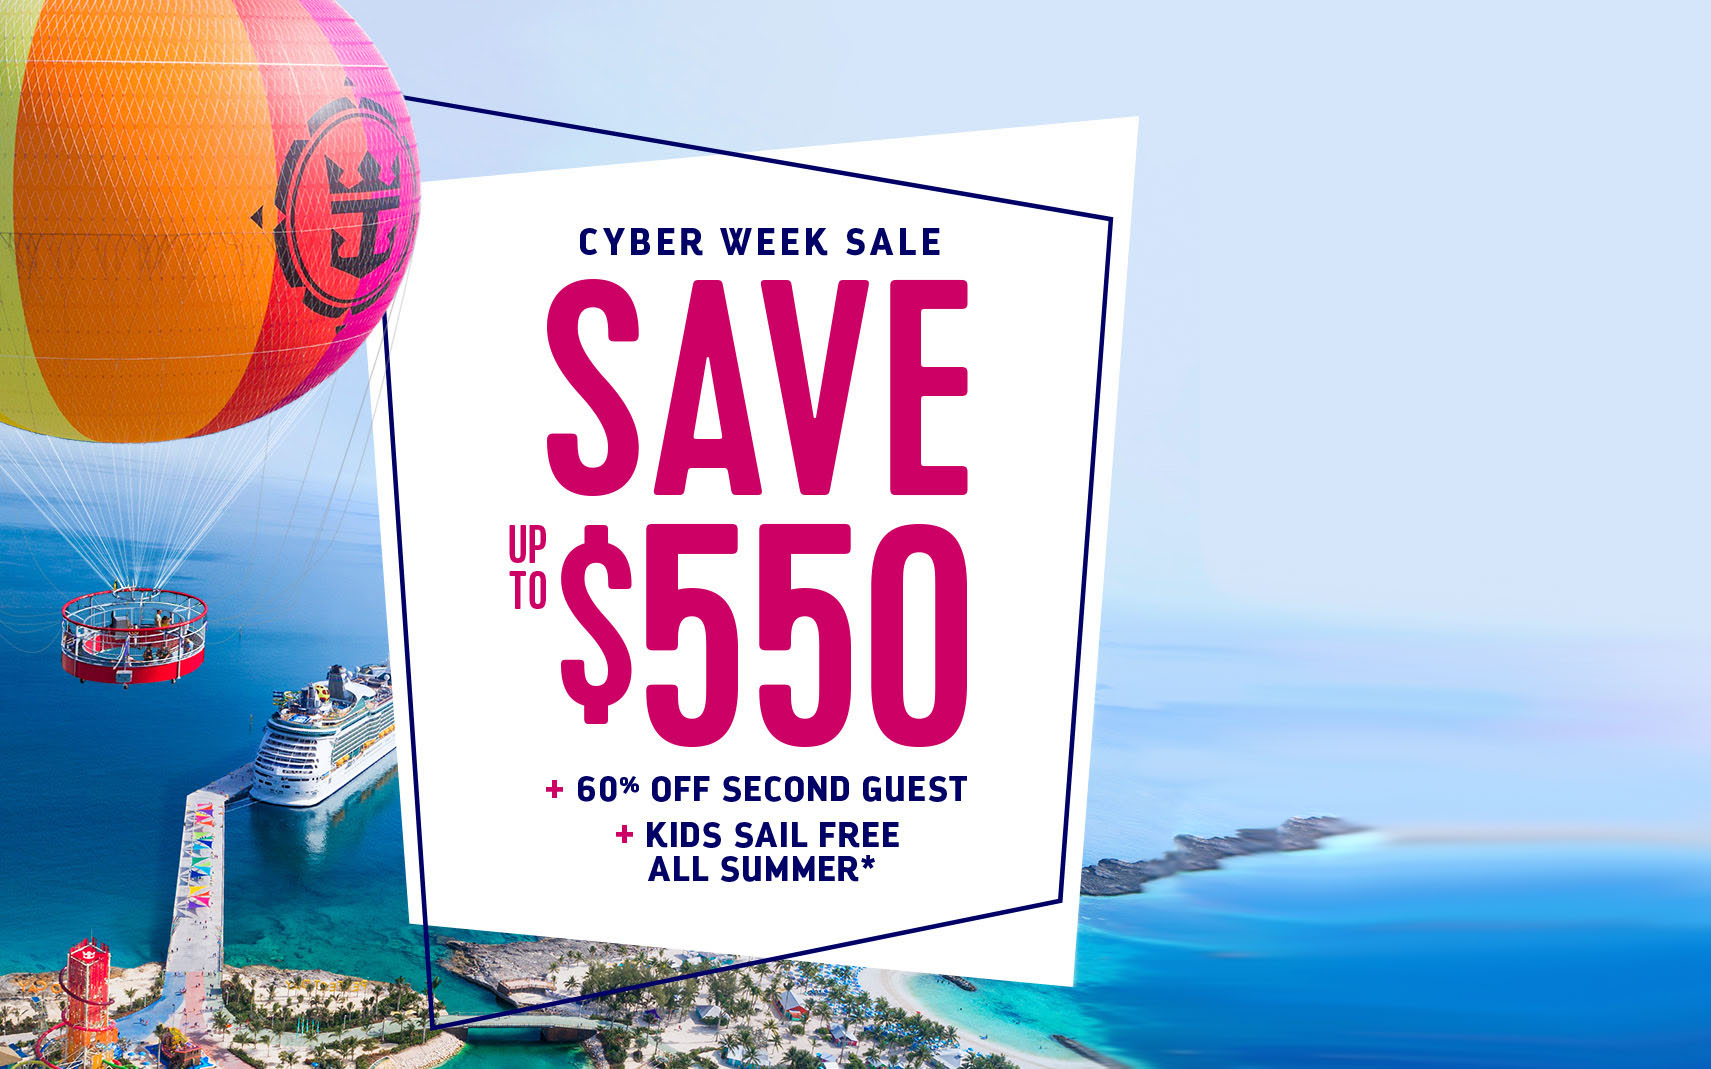 Royal Caribbean - Cyber Week Sales Save up to $550 + 60% OFF Second Guest + Kids Sail Free*